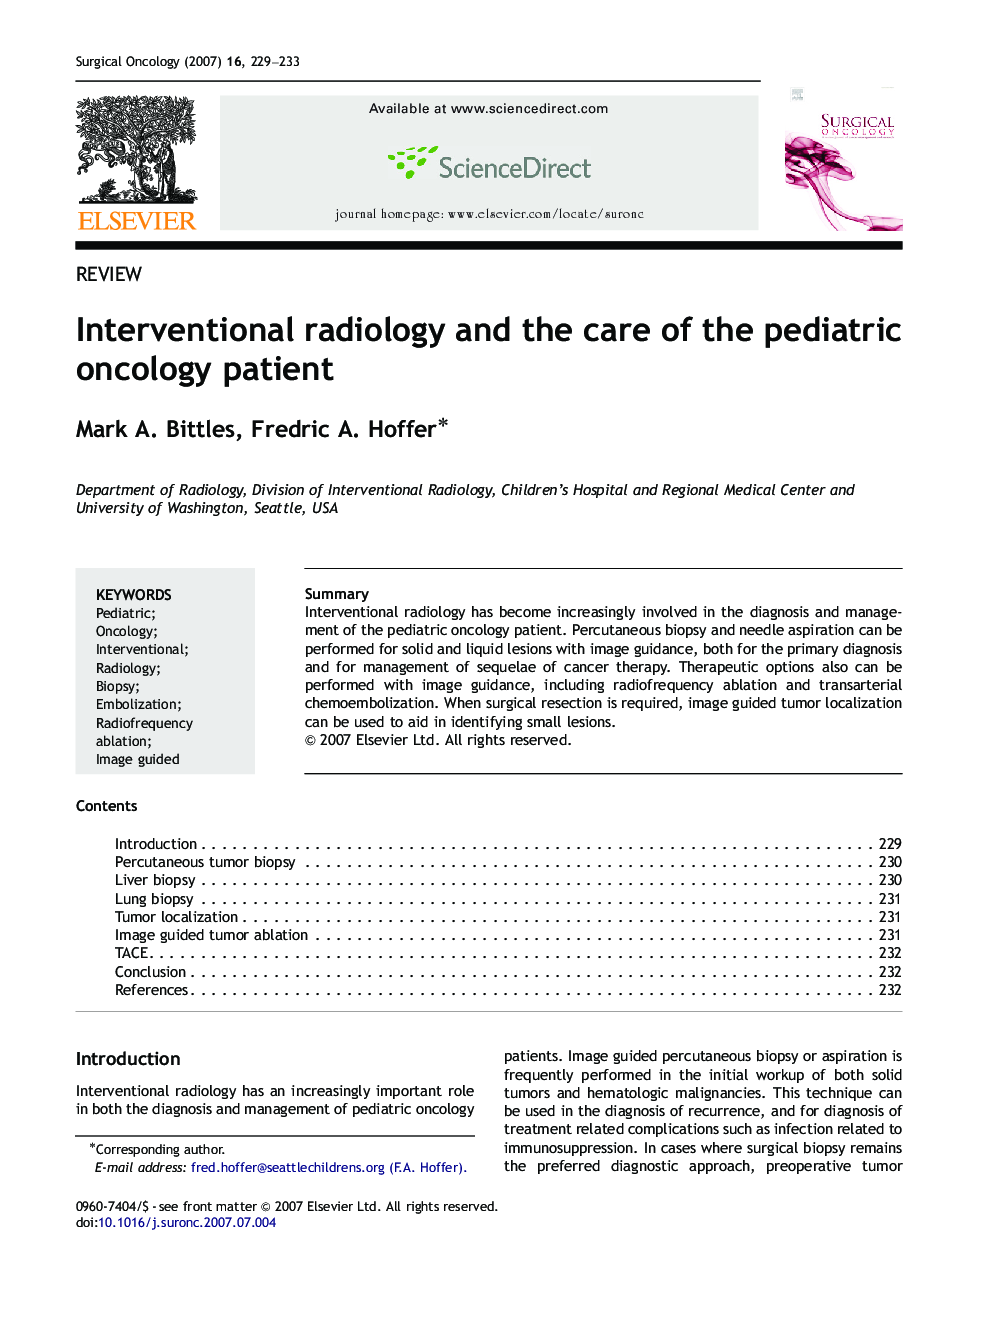 Interventional radiology and the care of the pediatric oncology patient